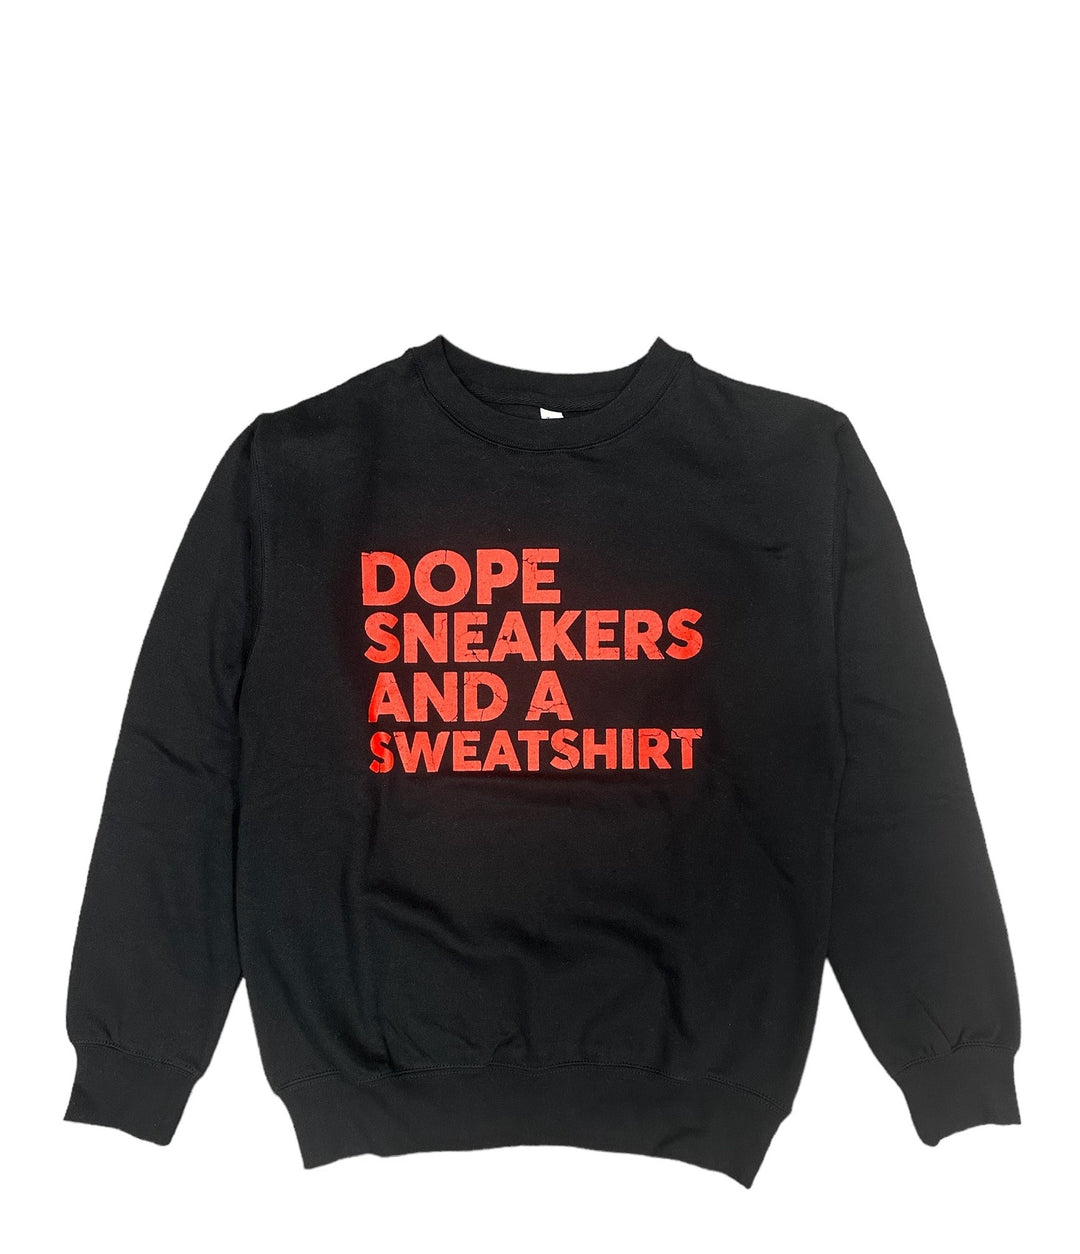 Dope Sneakers and a Sweatshirt